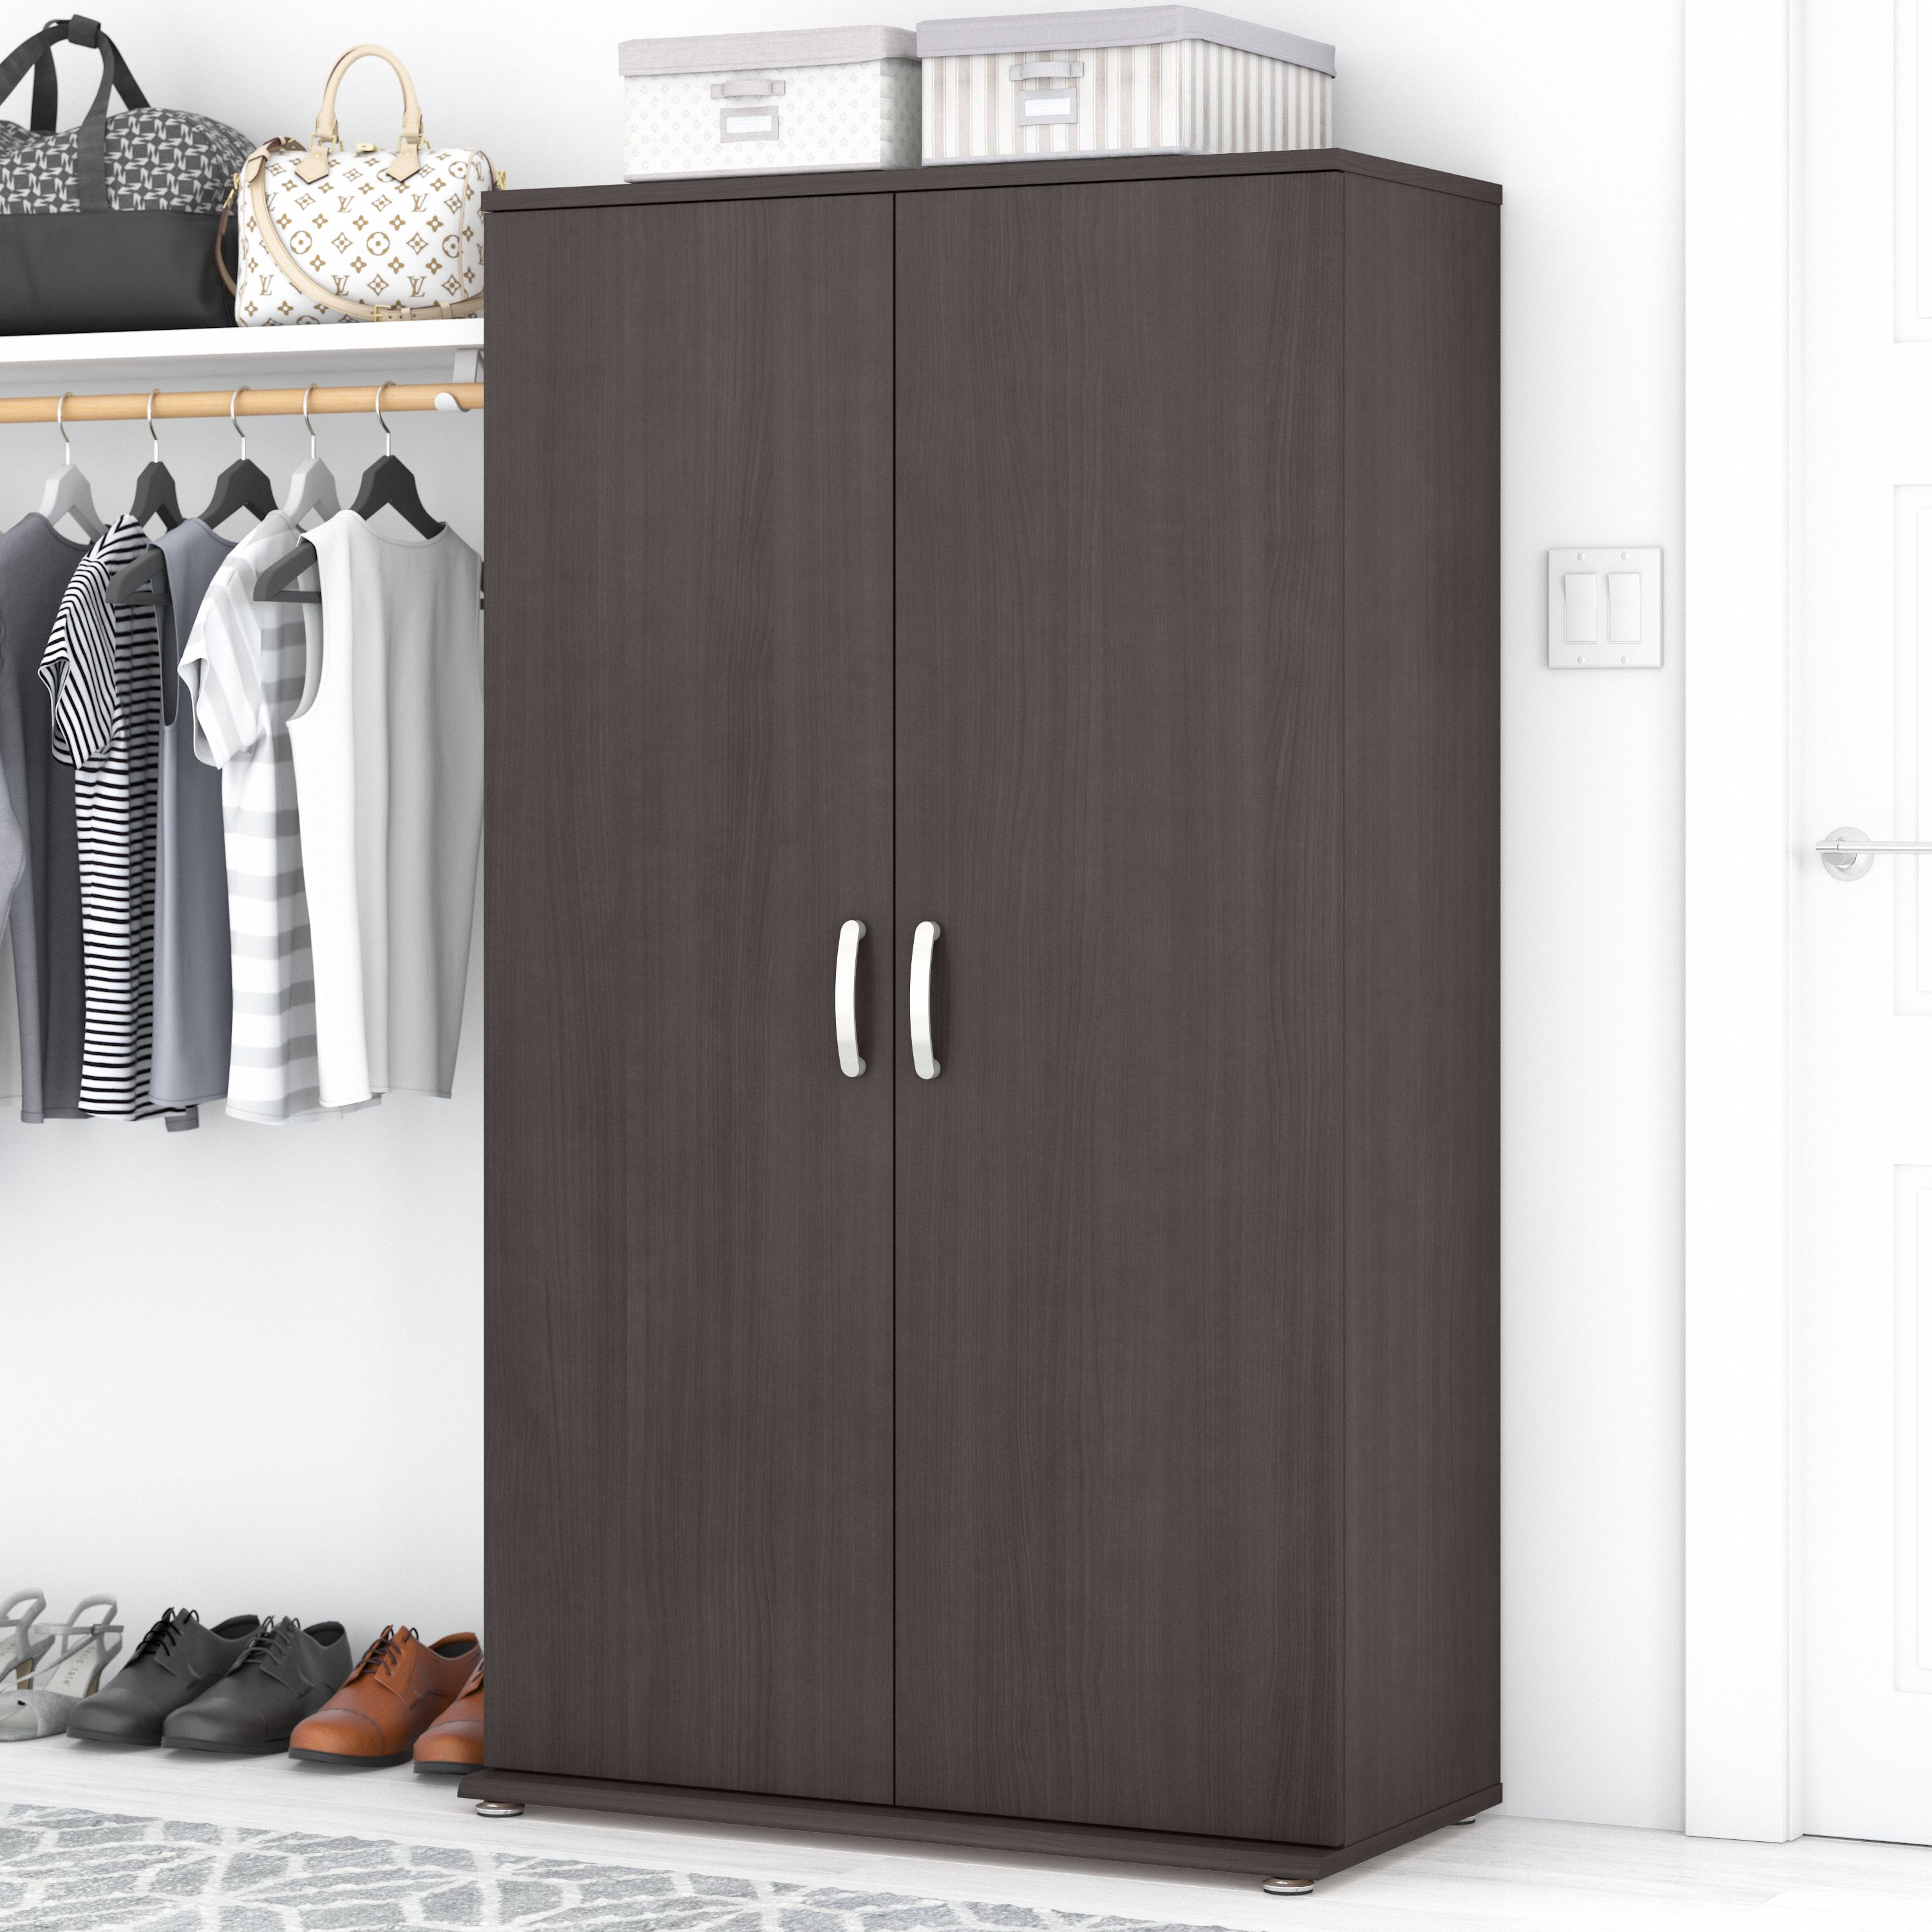 Shop Bush Business Furniture Universal Tall Clothing Storage Cabinet with Doors and Shelves 01 CLS136SG-Z #color_storm gray